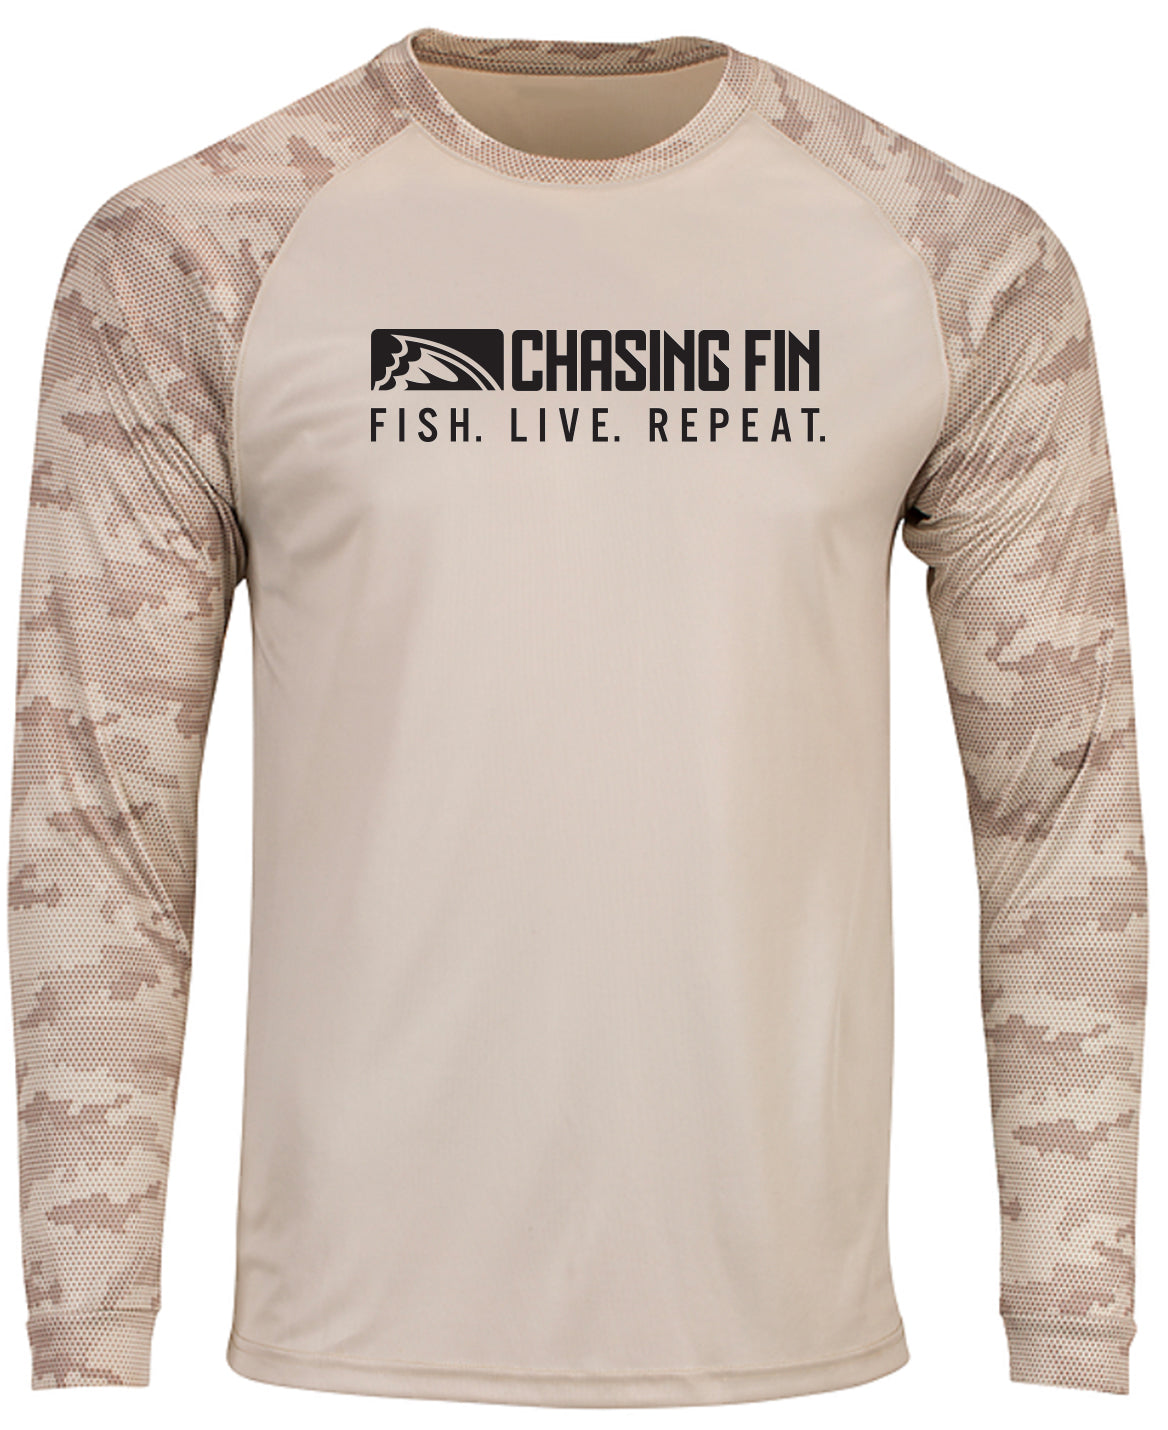 Chasing Fin Performance CAMO Fishing Shirt for Men with SPF 50 Protection.